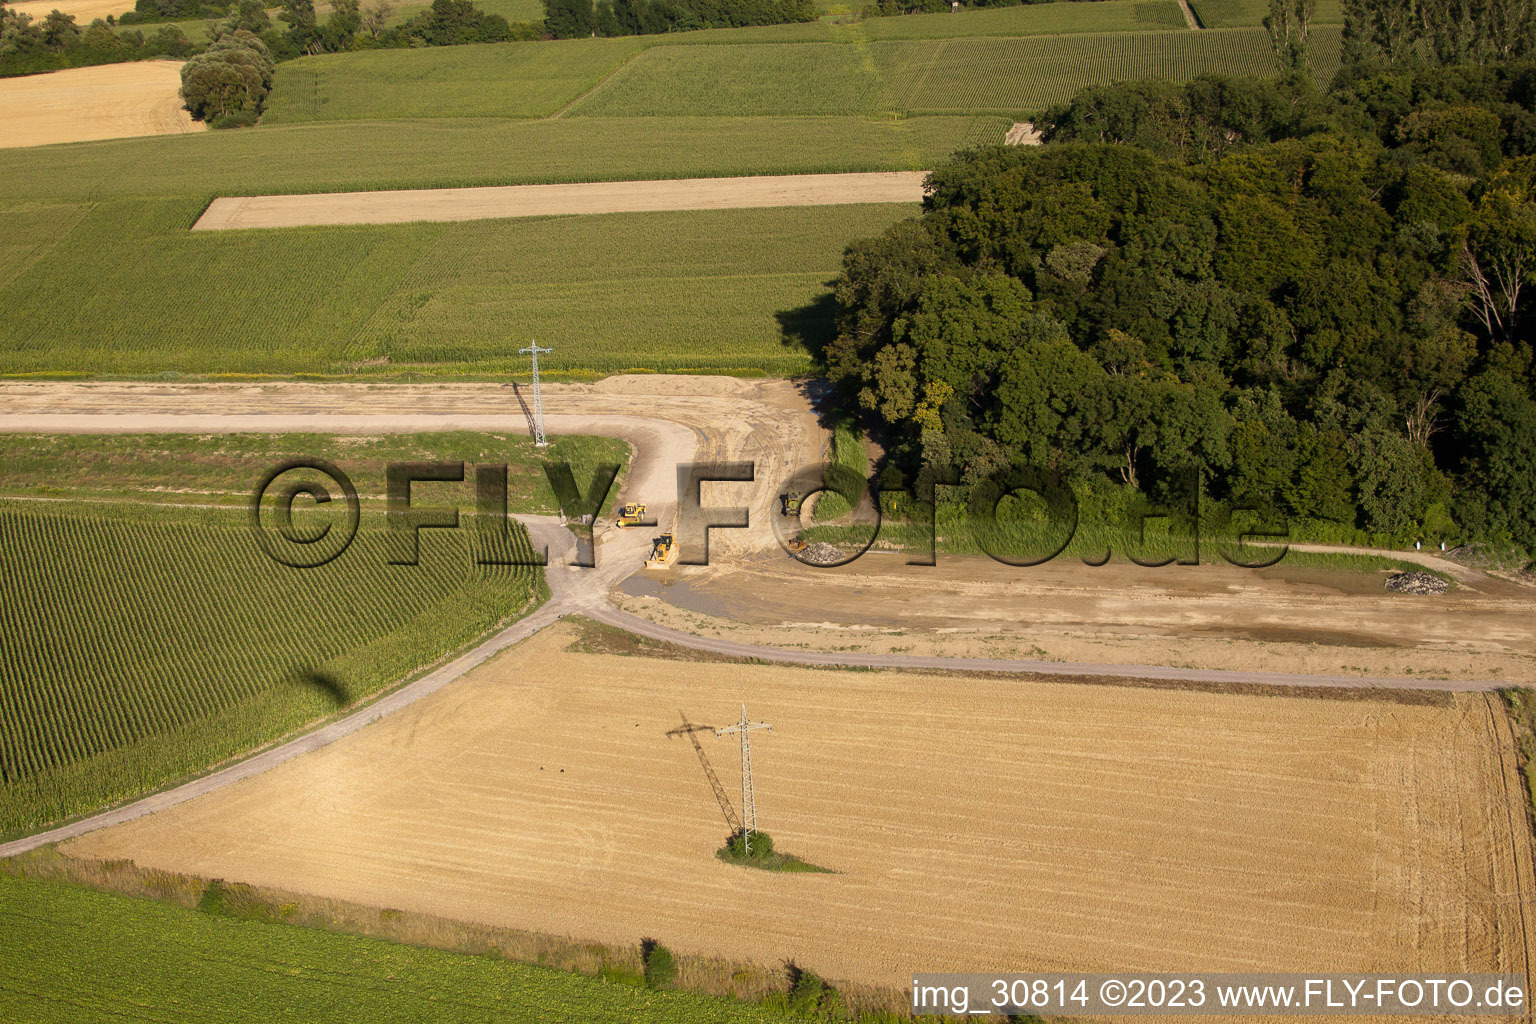 Polder construction in Neupotz in the state Rhineland-Palatinate, Germany